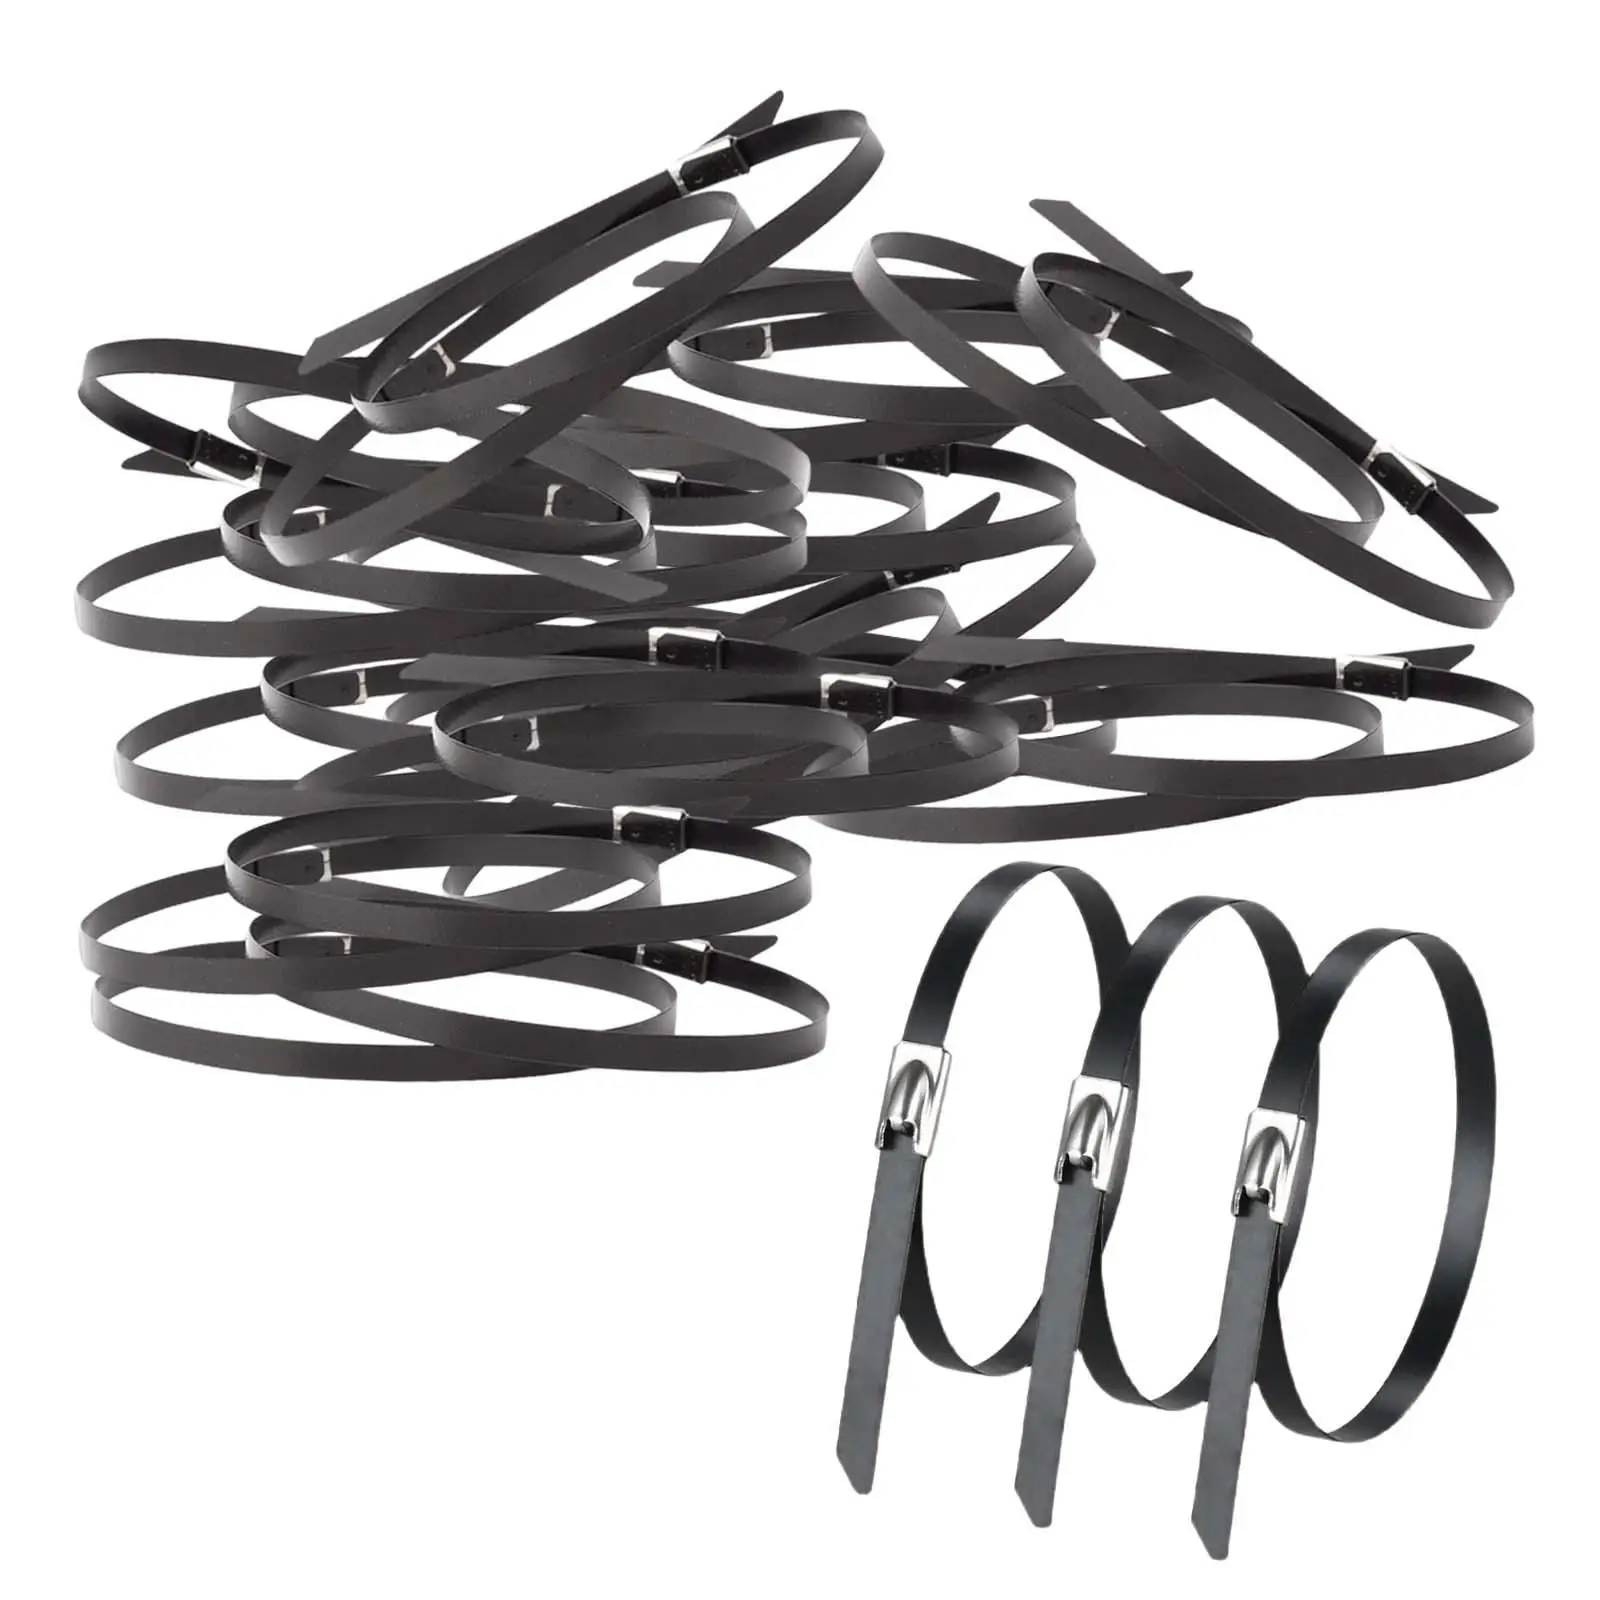 100Pcs 304 Stainless Steel Cable Ties Wrap Coated Sturdy Practical Heavy Duty Accessories Black Color Versatile for Farms Pipes